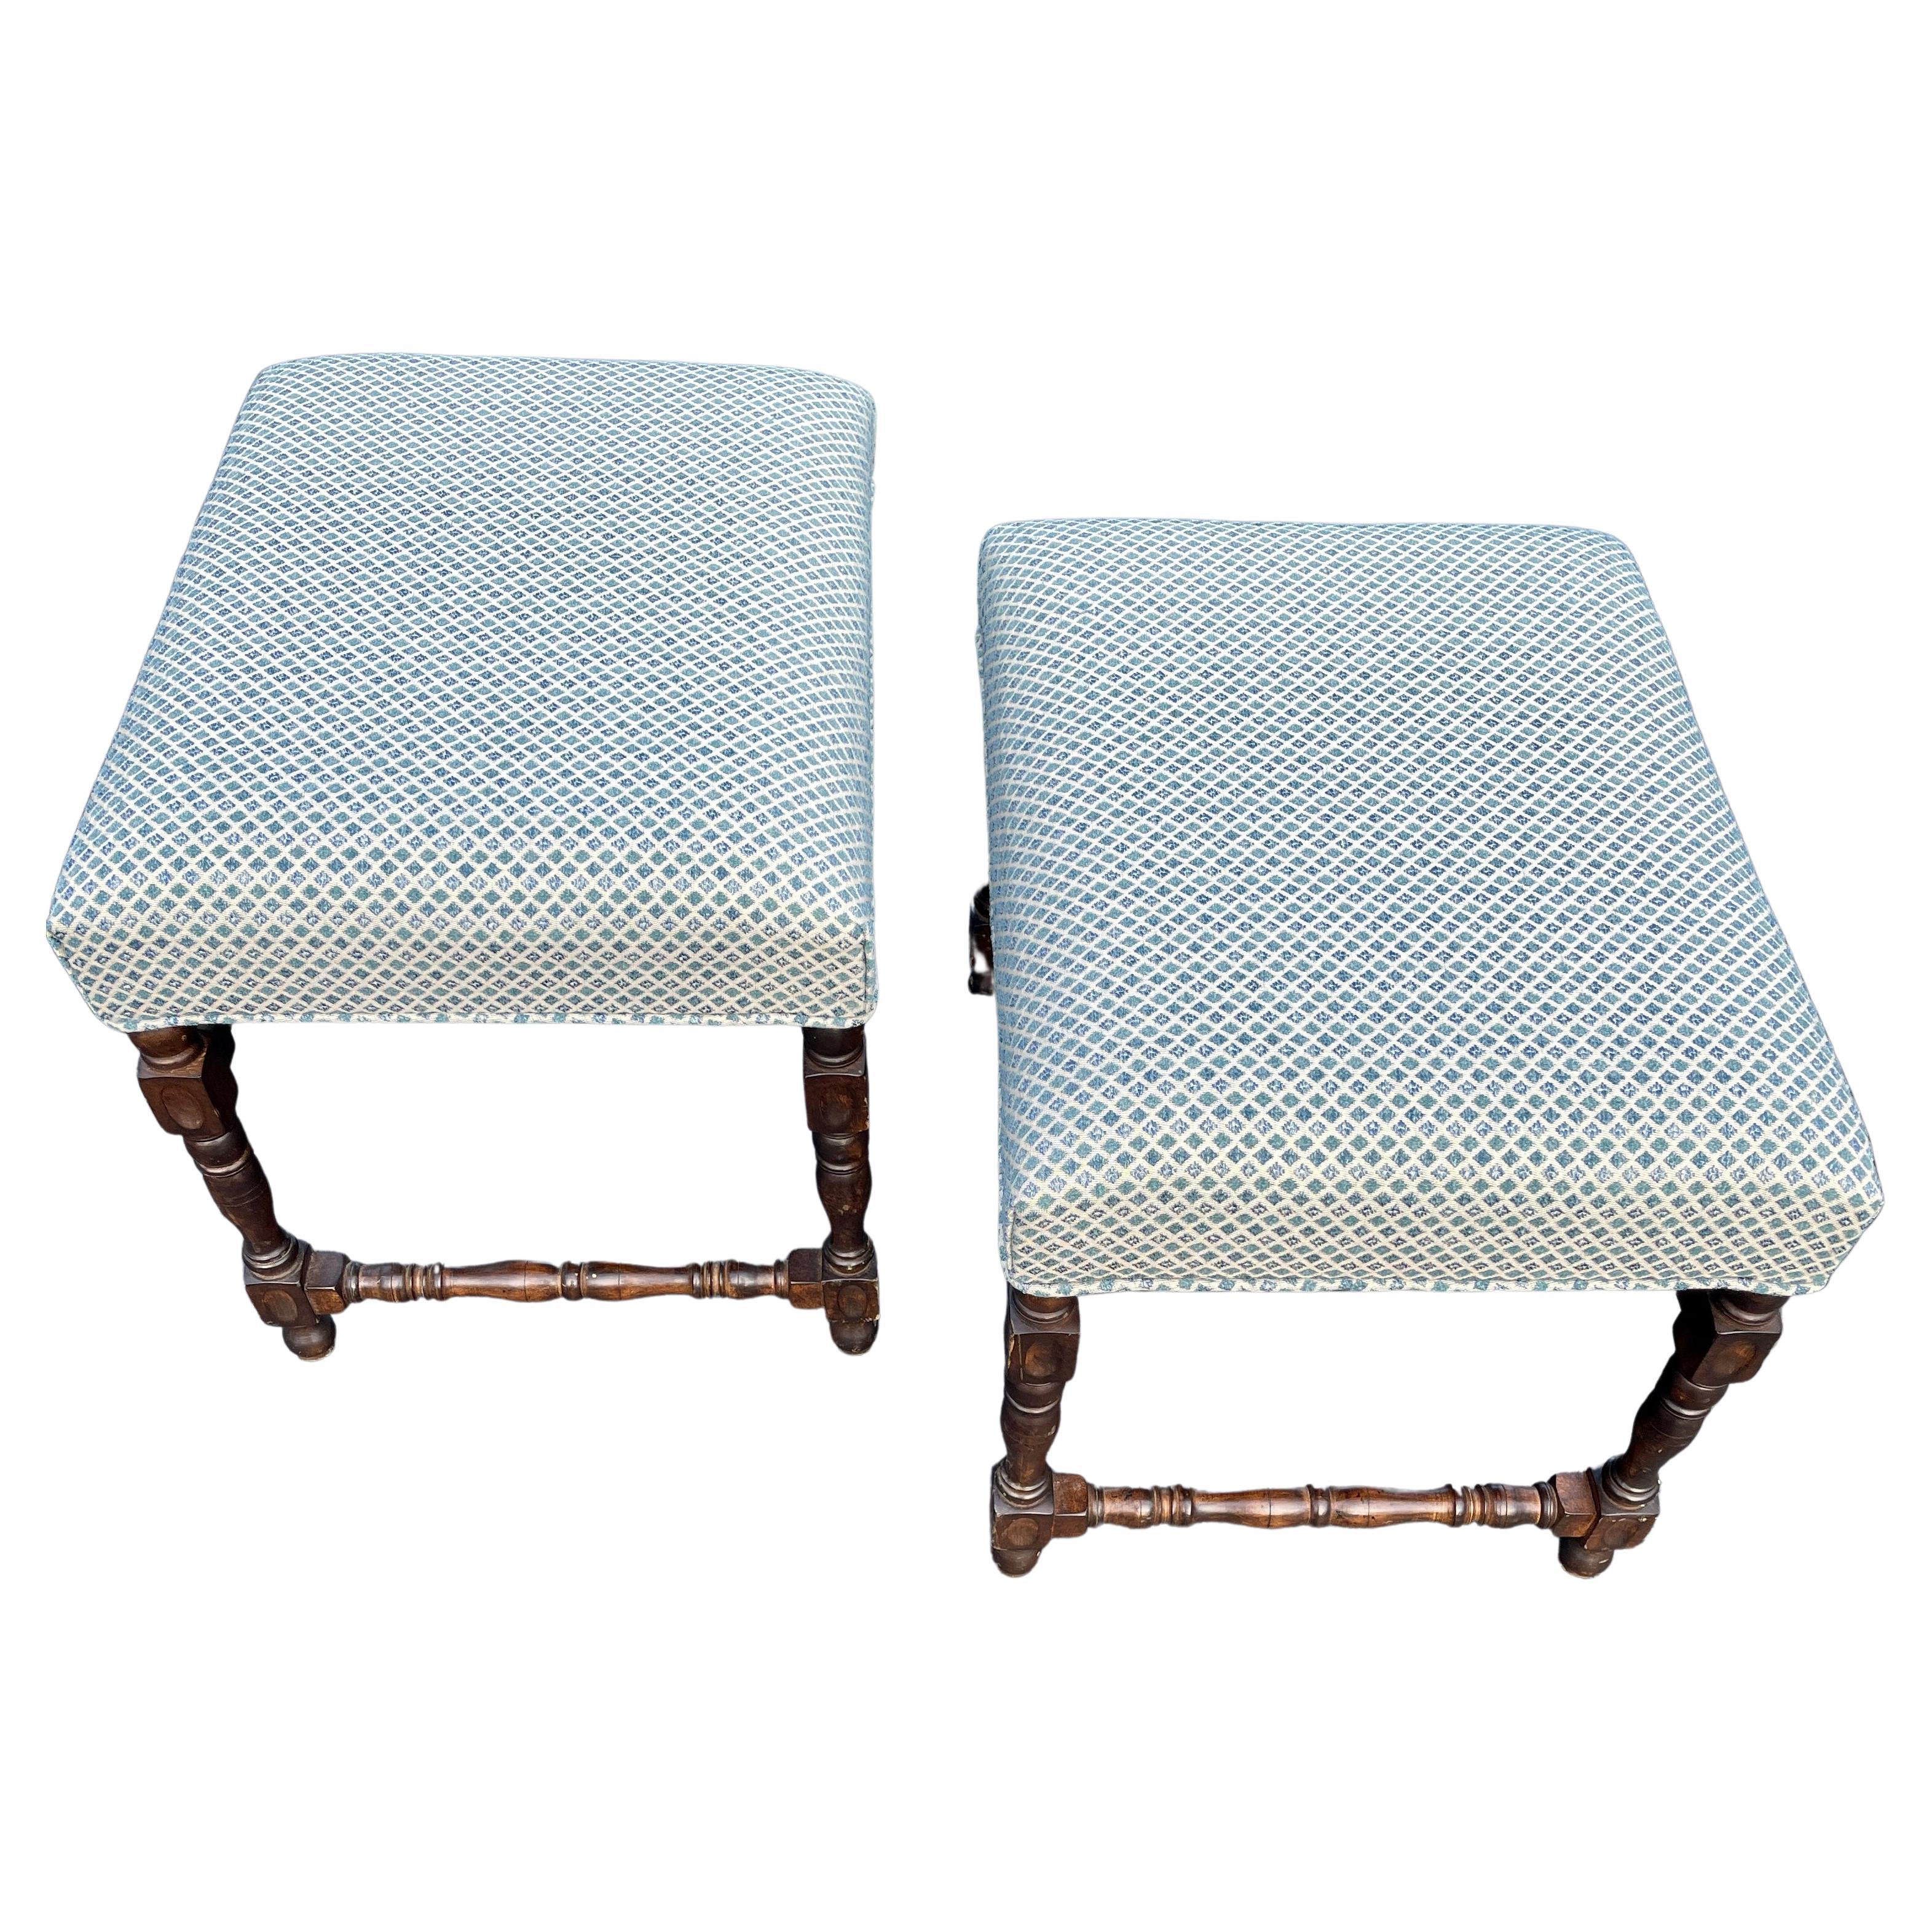 Late 19th Century antique barley twist ottomans or stools. Newly upholstered. This traditional yet chic pair of stools or ottomans consists of barley twist legs and stretchers, with new blue and cream linen upholstery.